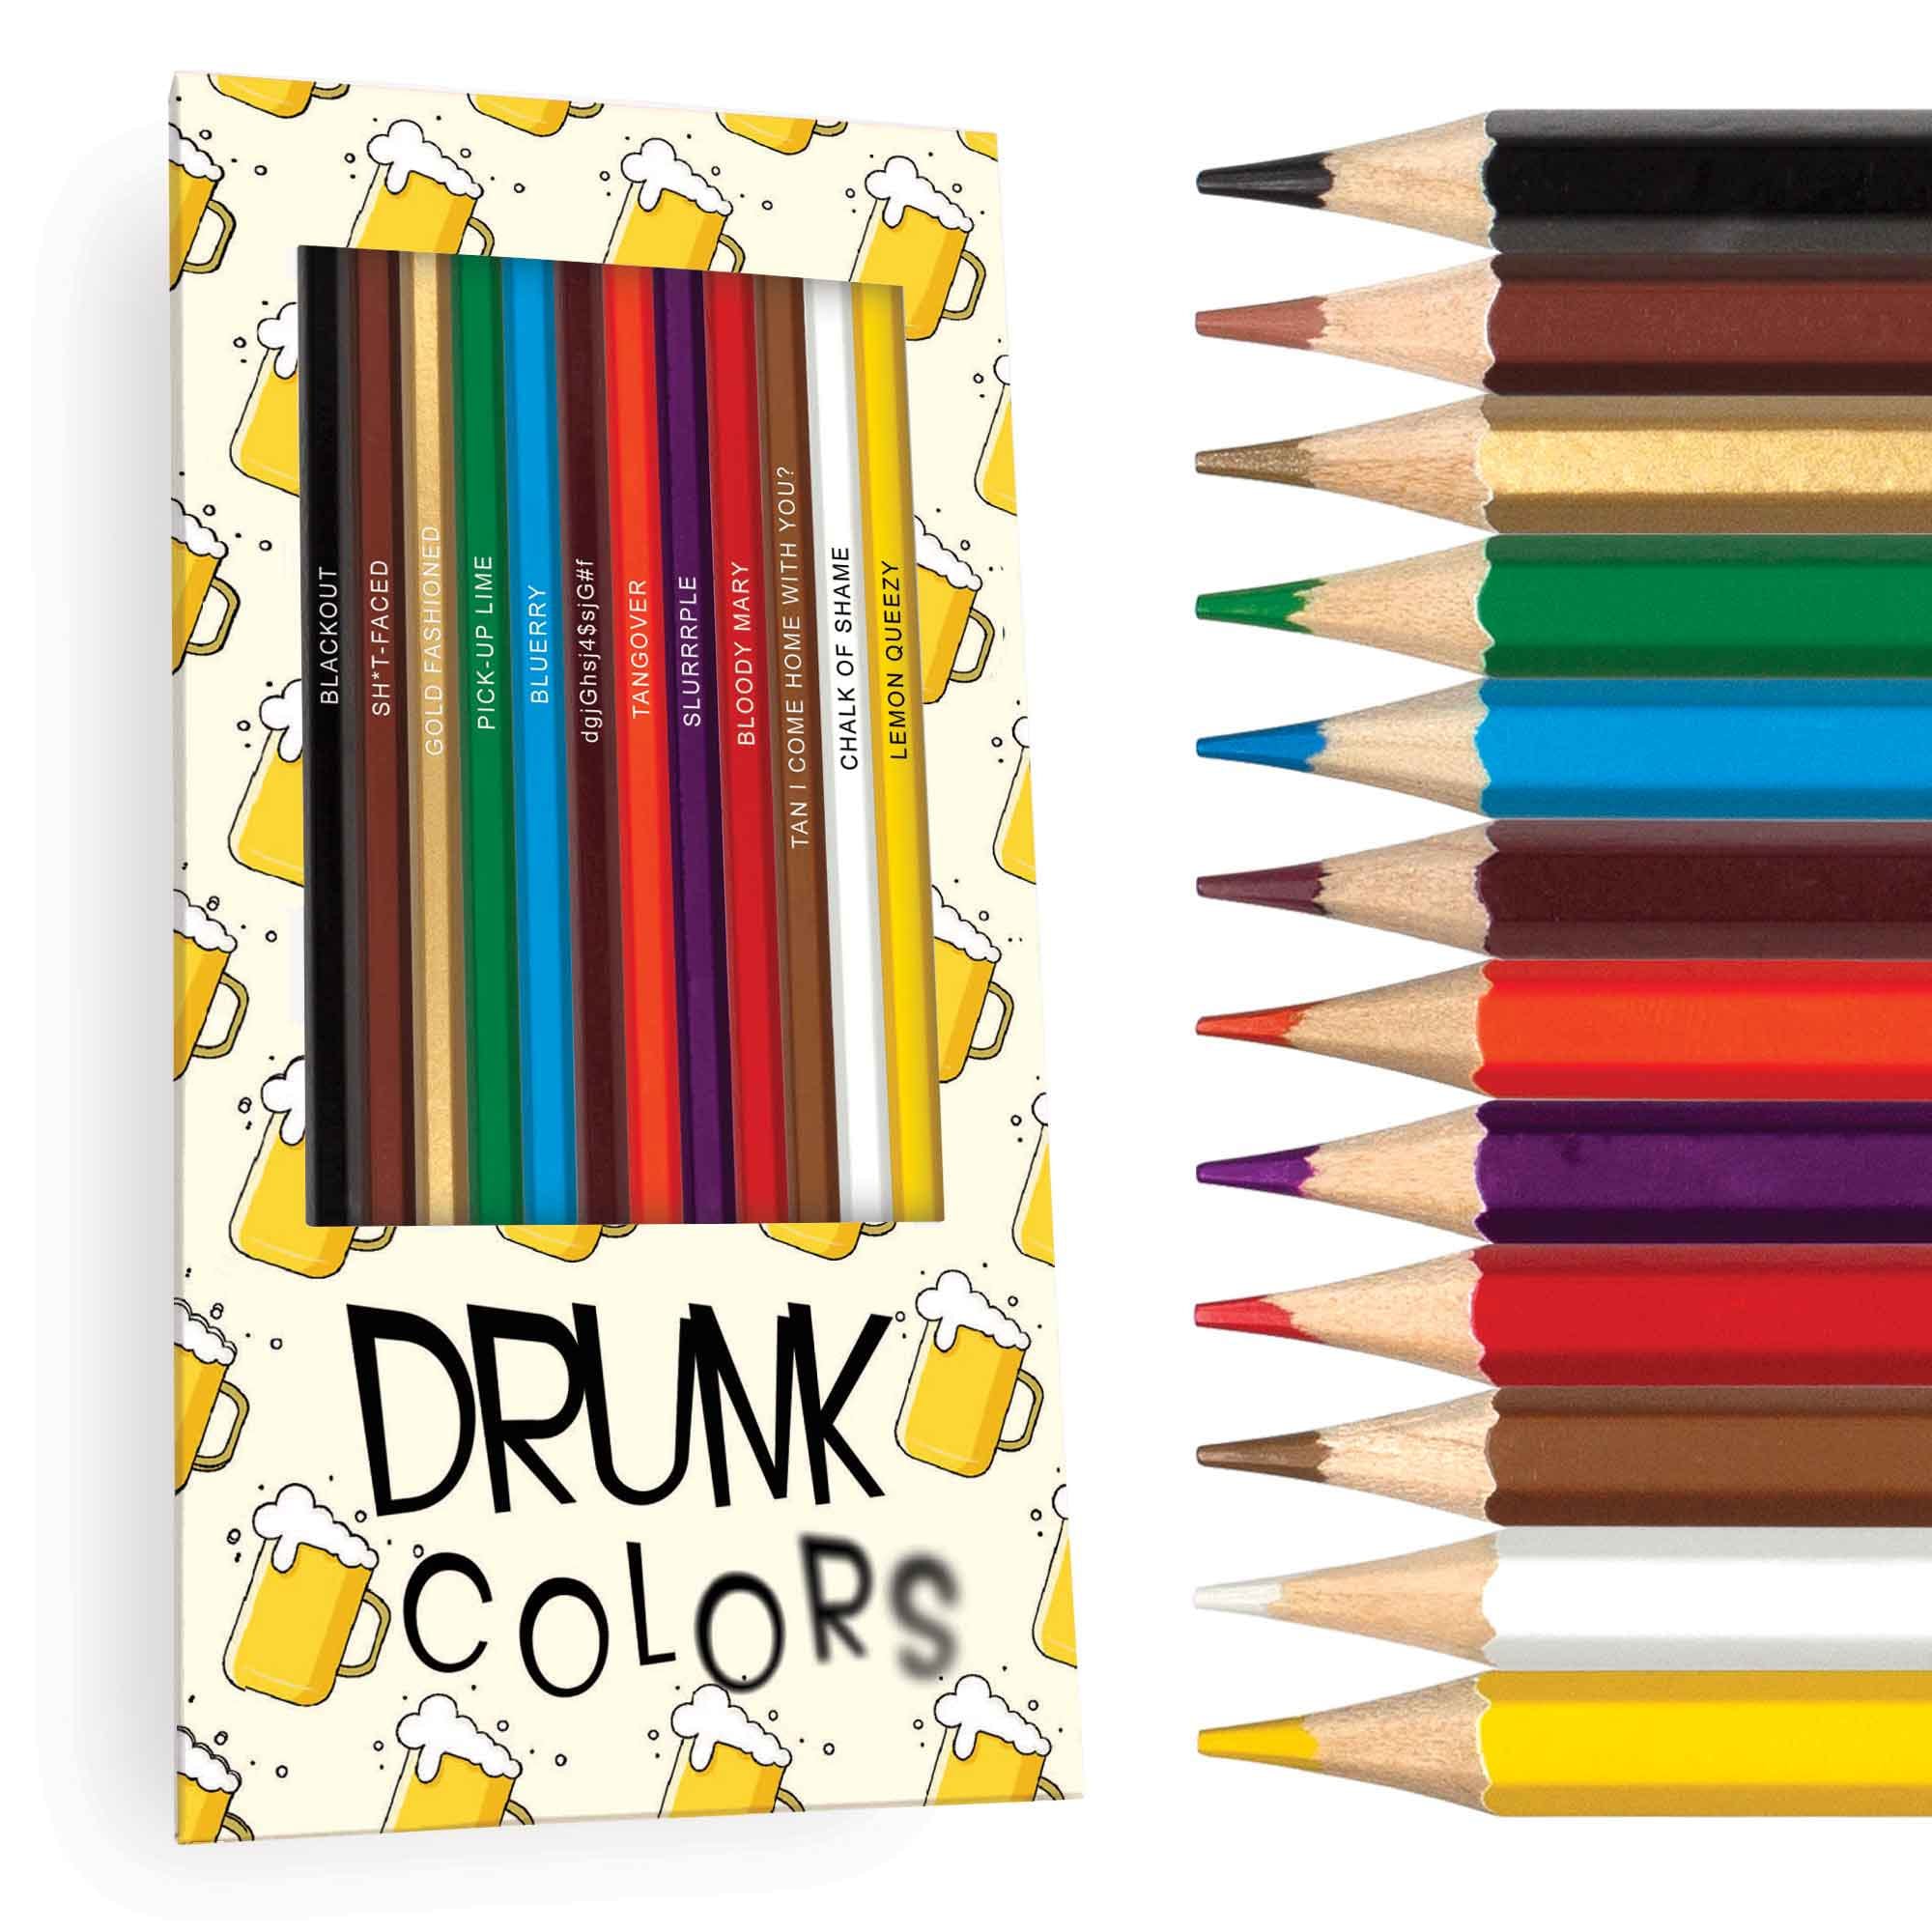 White Crayola Colored Pencils - Set of 5 or 10 with Sharpener